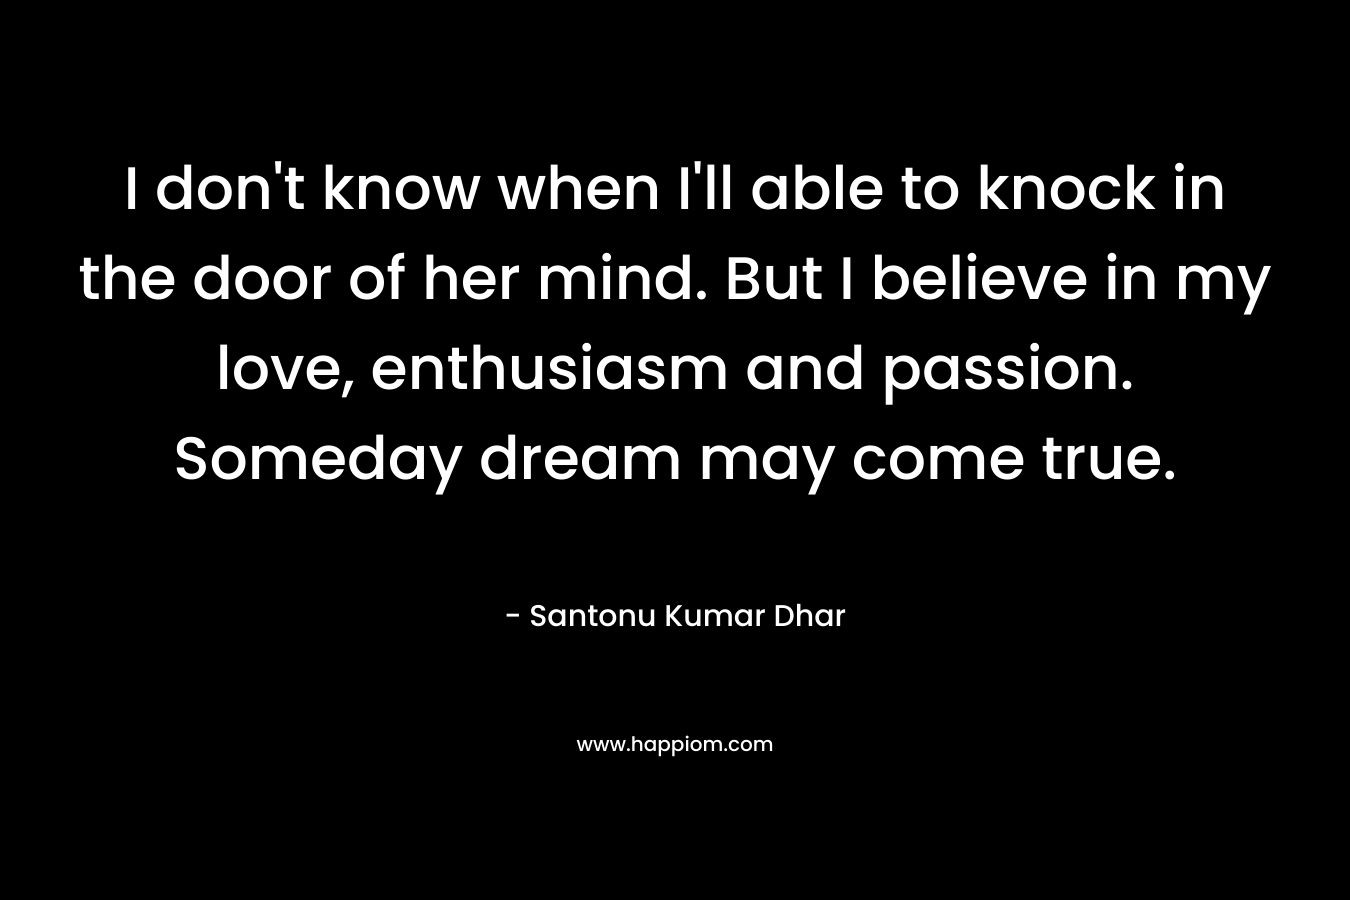 I don't know when I'll able to knock in the door of her mind. But I believe in my love, enthusiasm and passion. Someday dream may come true.